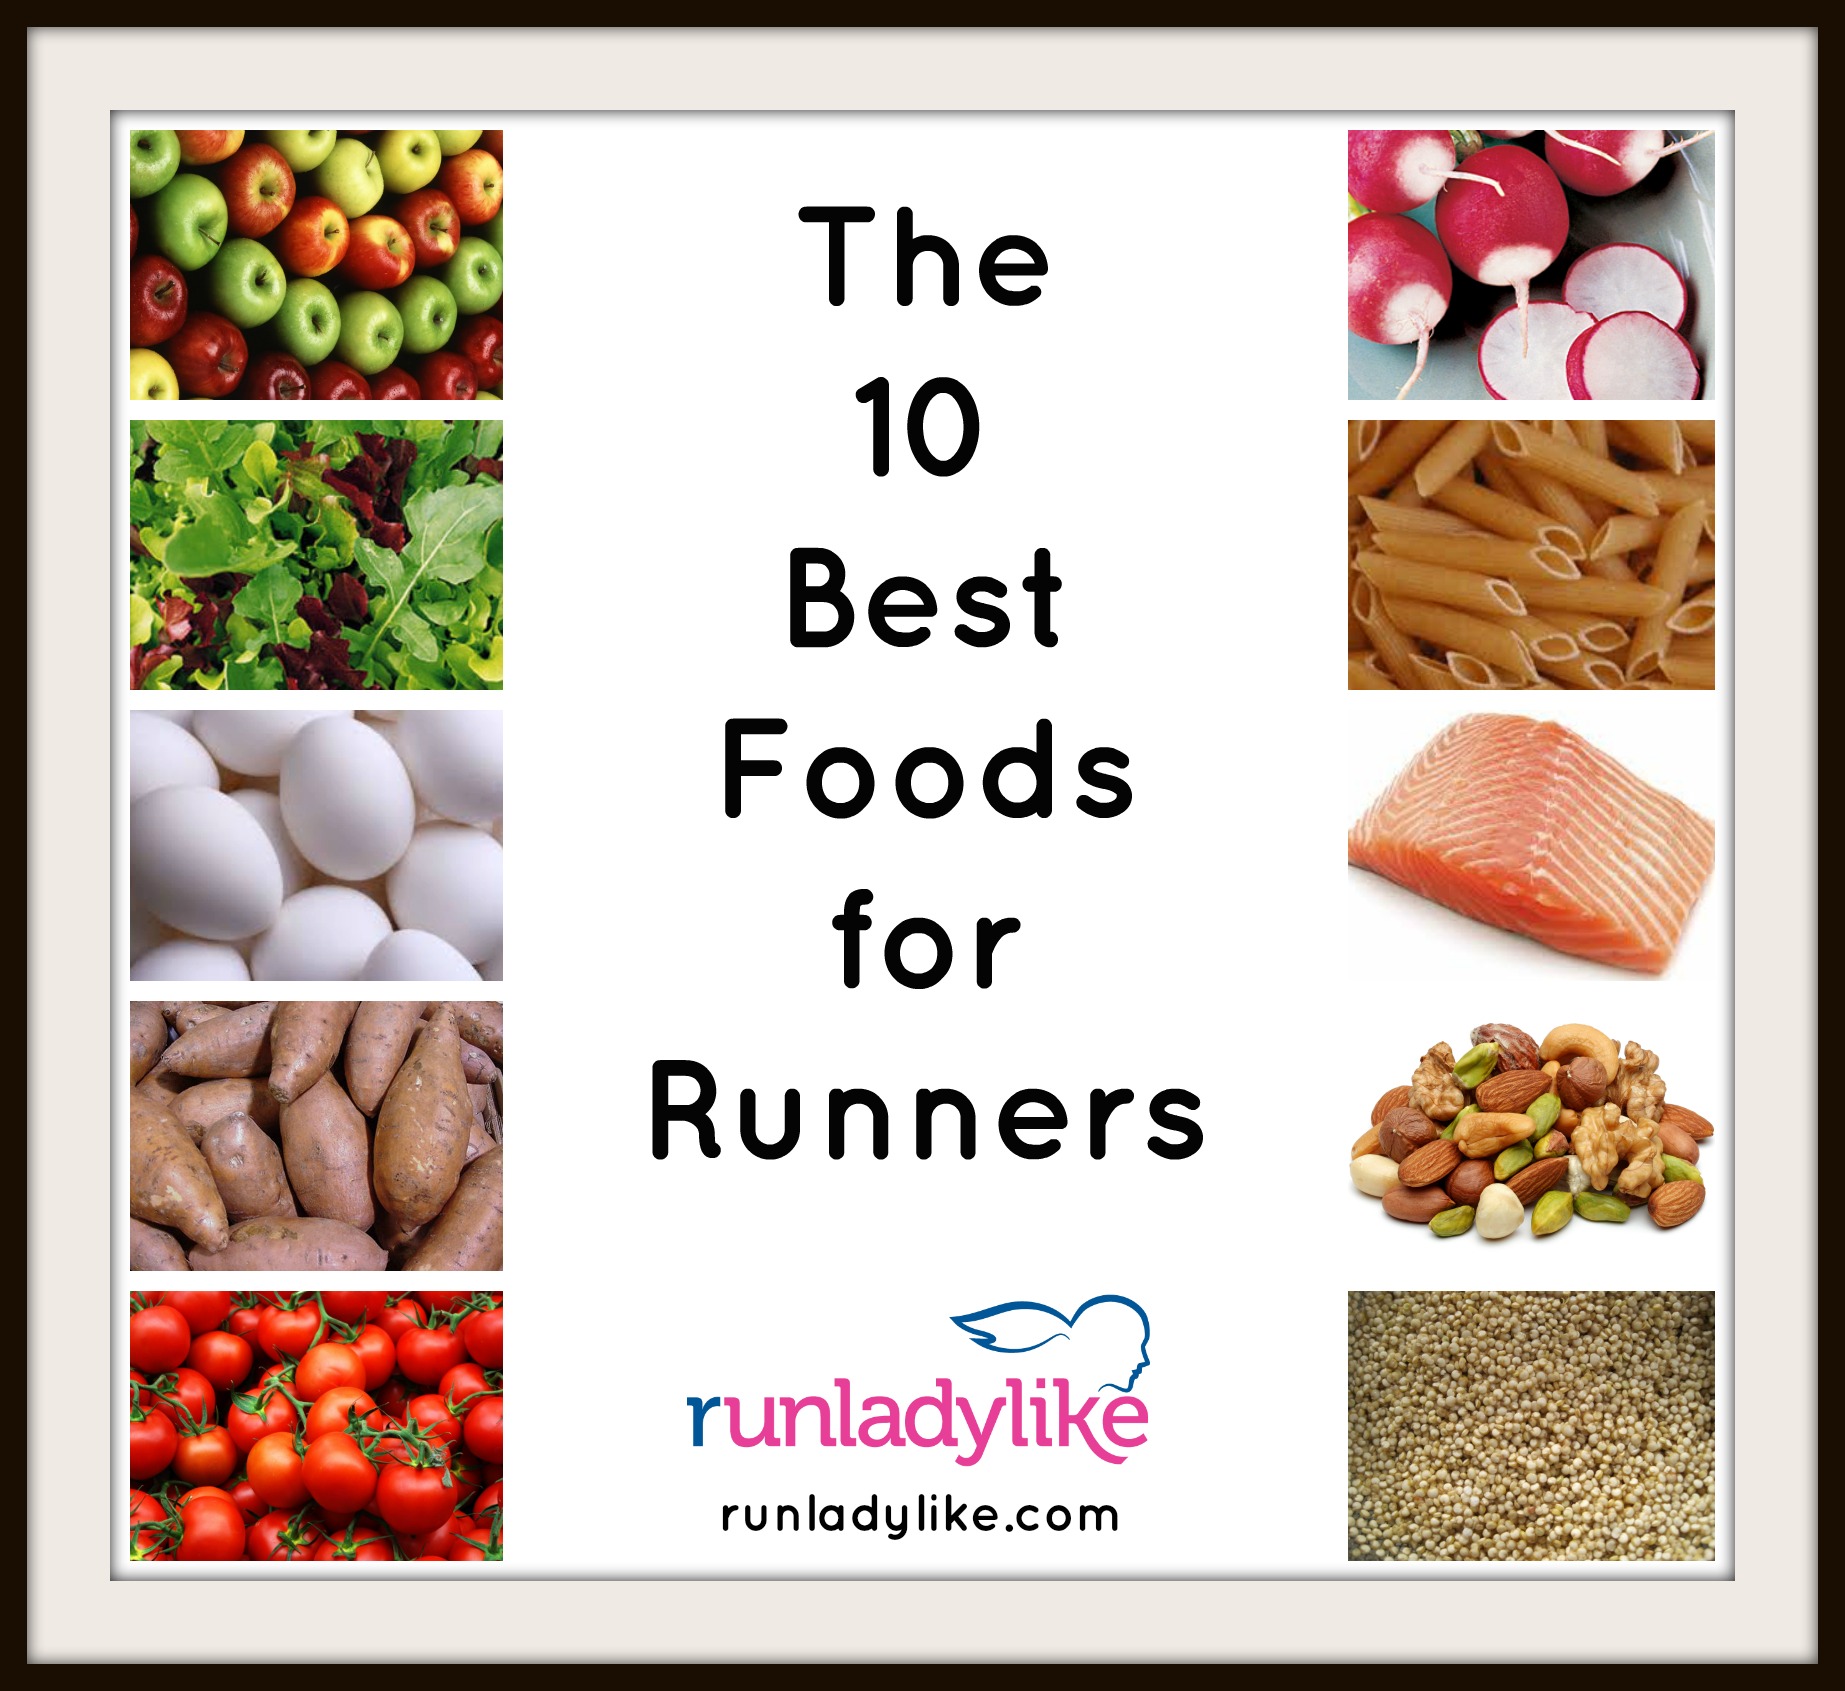 10 Best Foods for Runners & Run Happy Recipes - rUnladylike